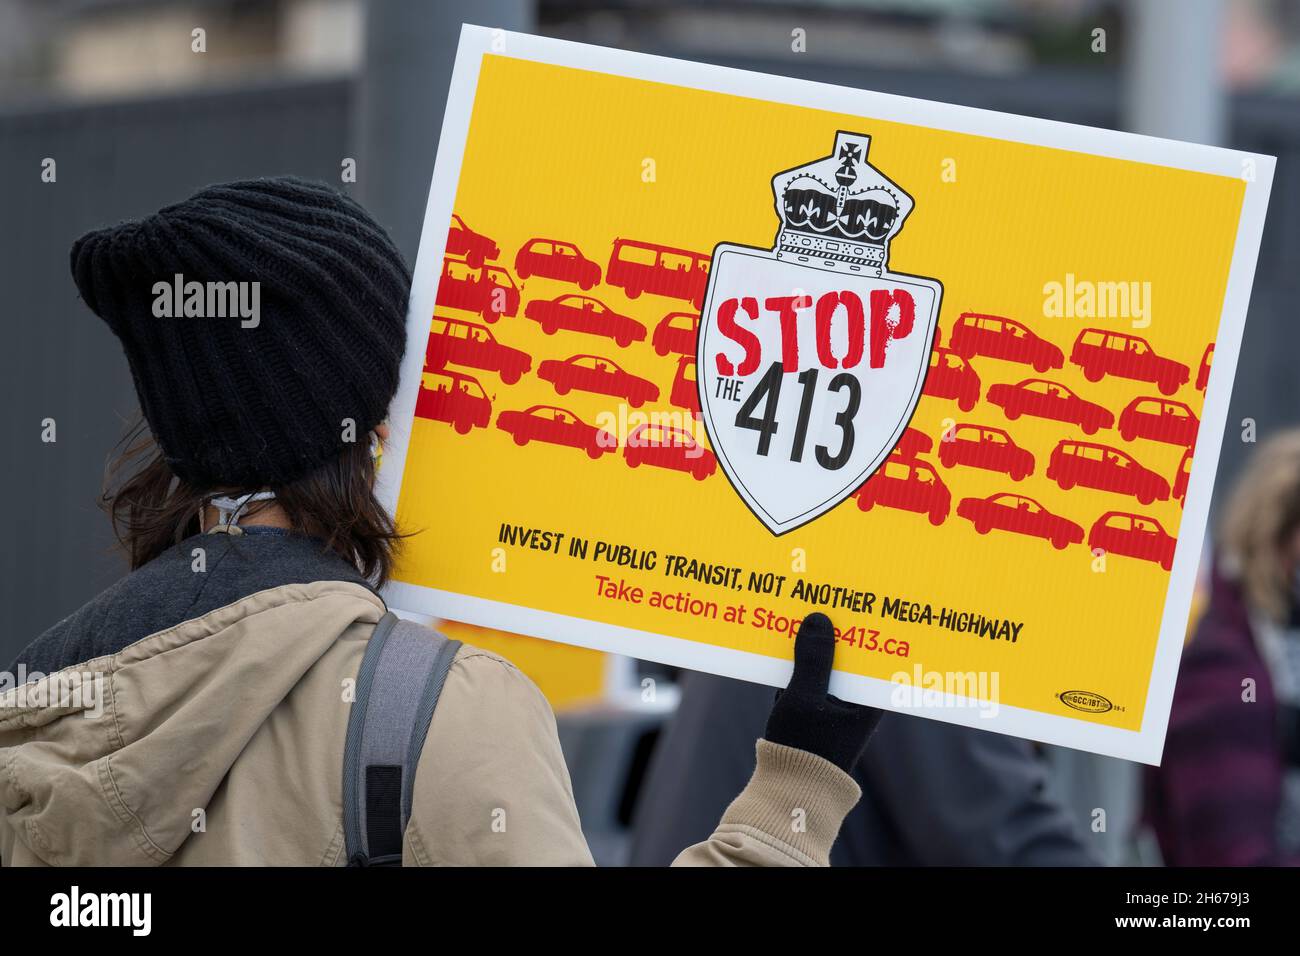 Protestor holds a sign in protest of Ontario's proposed Highway 413, Day of Action Stop 413 and save the Greenbelt, November 13 2021 Stock Photo